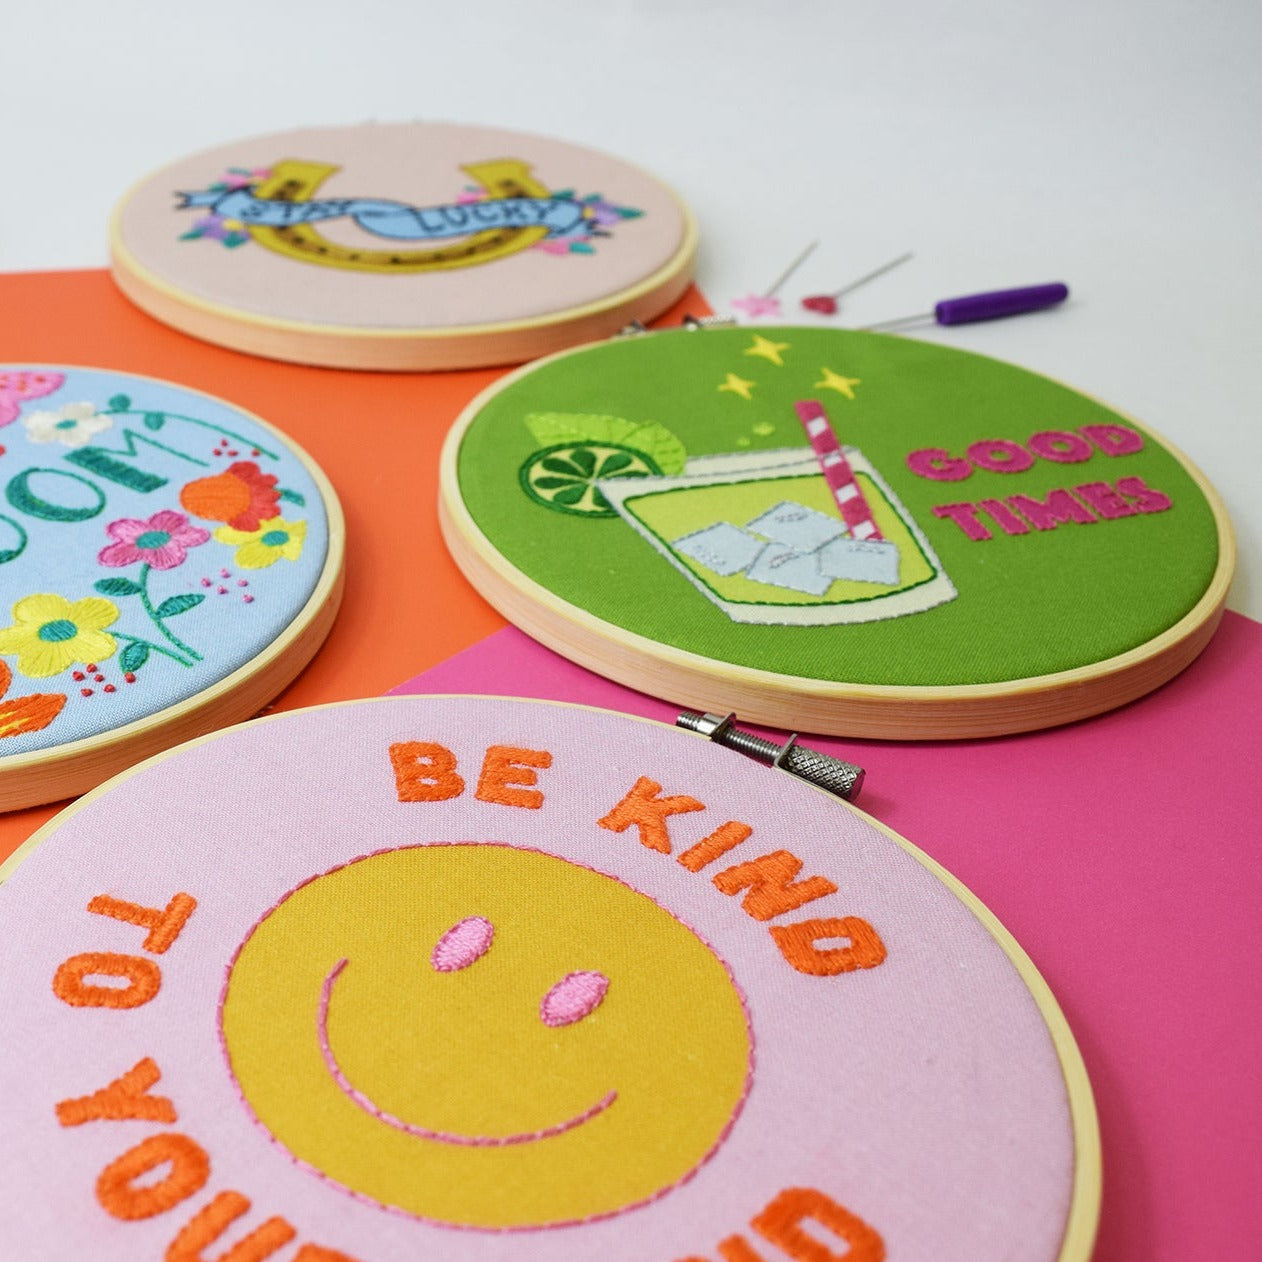 'Good Times' Large Embroidery Craft Kit